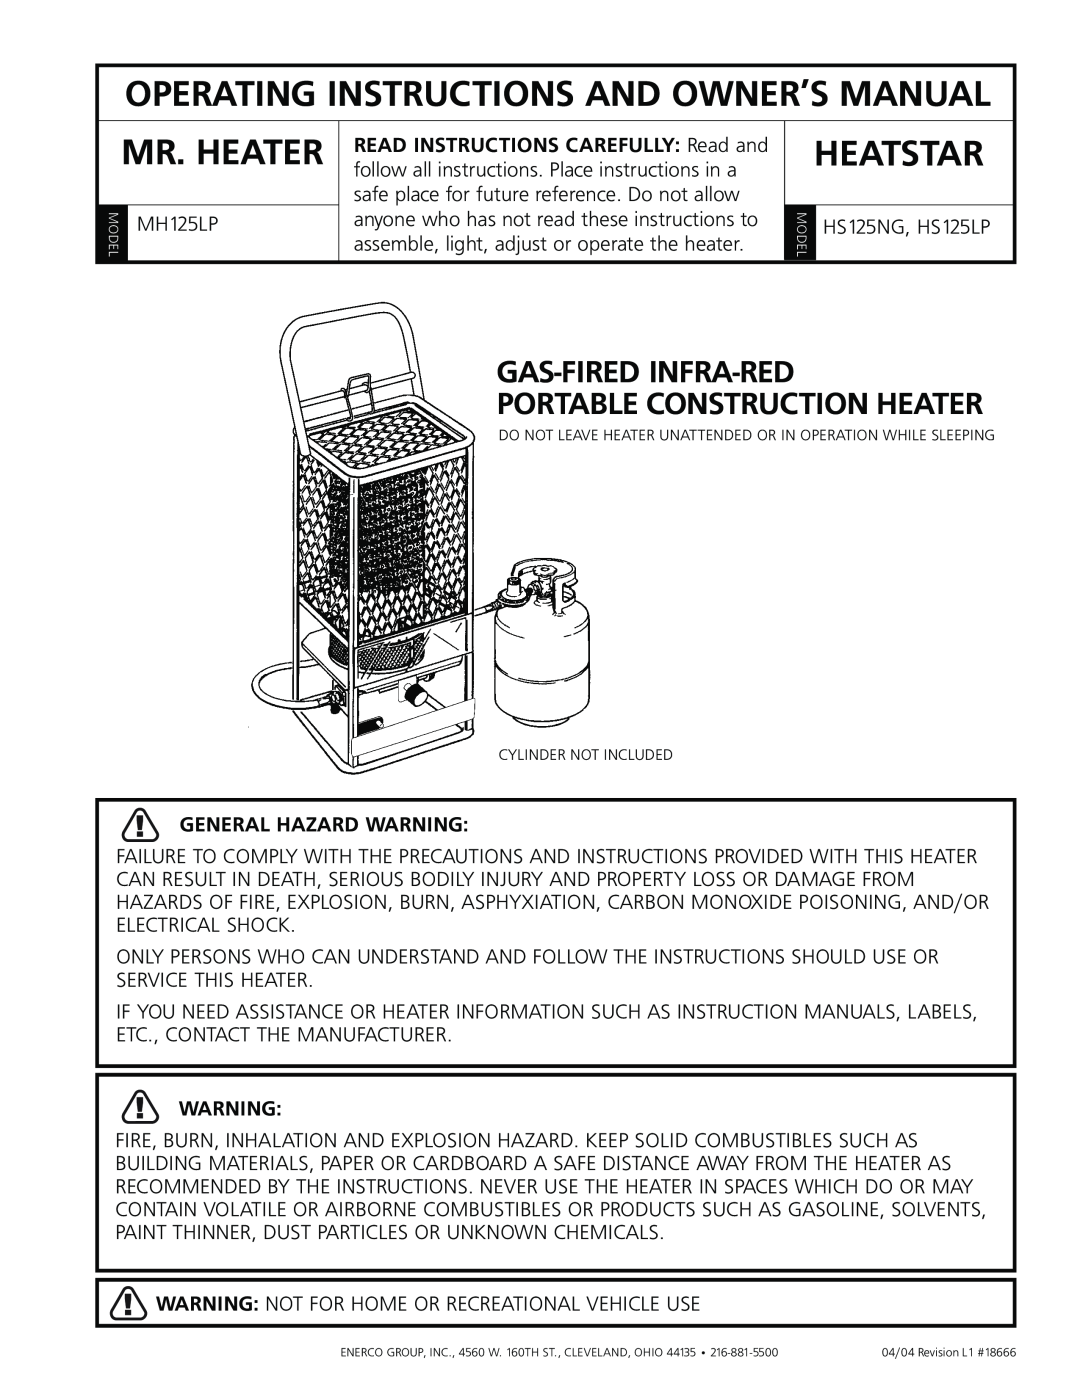 Mr. Heater HS125NG, MH125LP operating instructions Mr. Heater, Heatstar, Gas-Fired Infra-Red Portable Construction Heater 